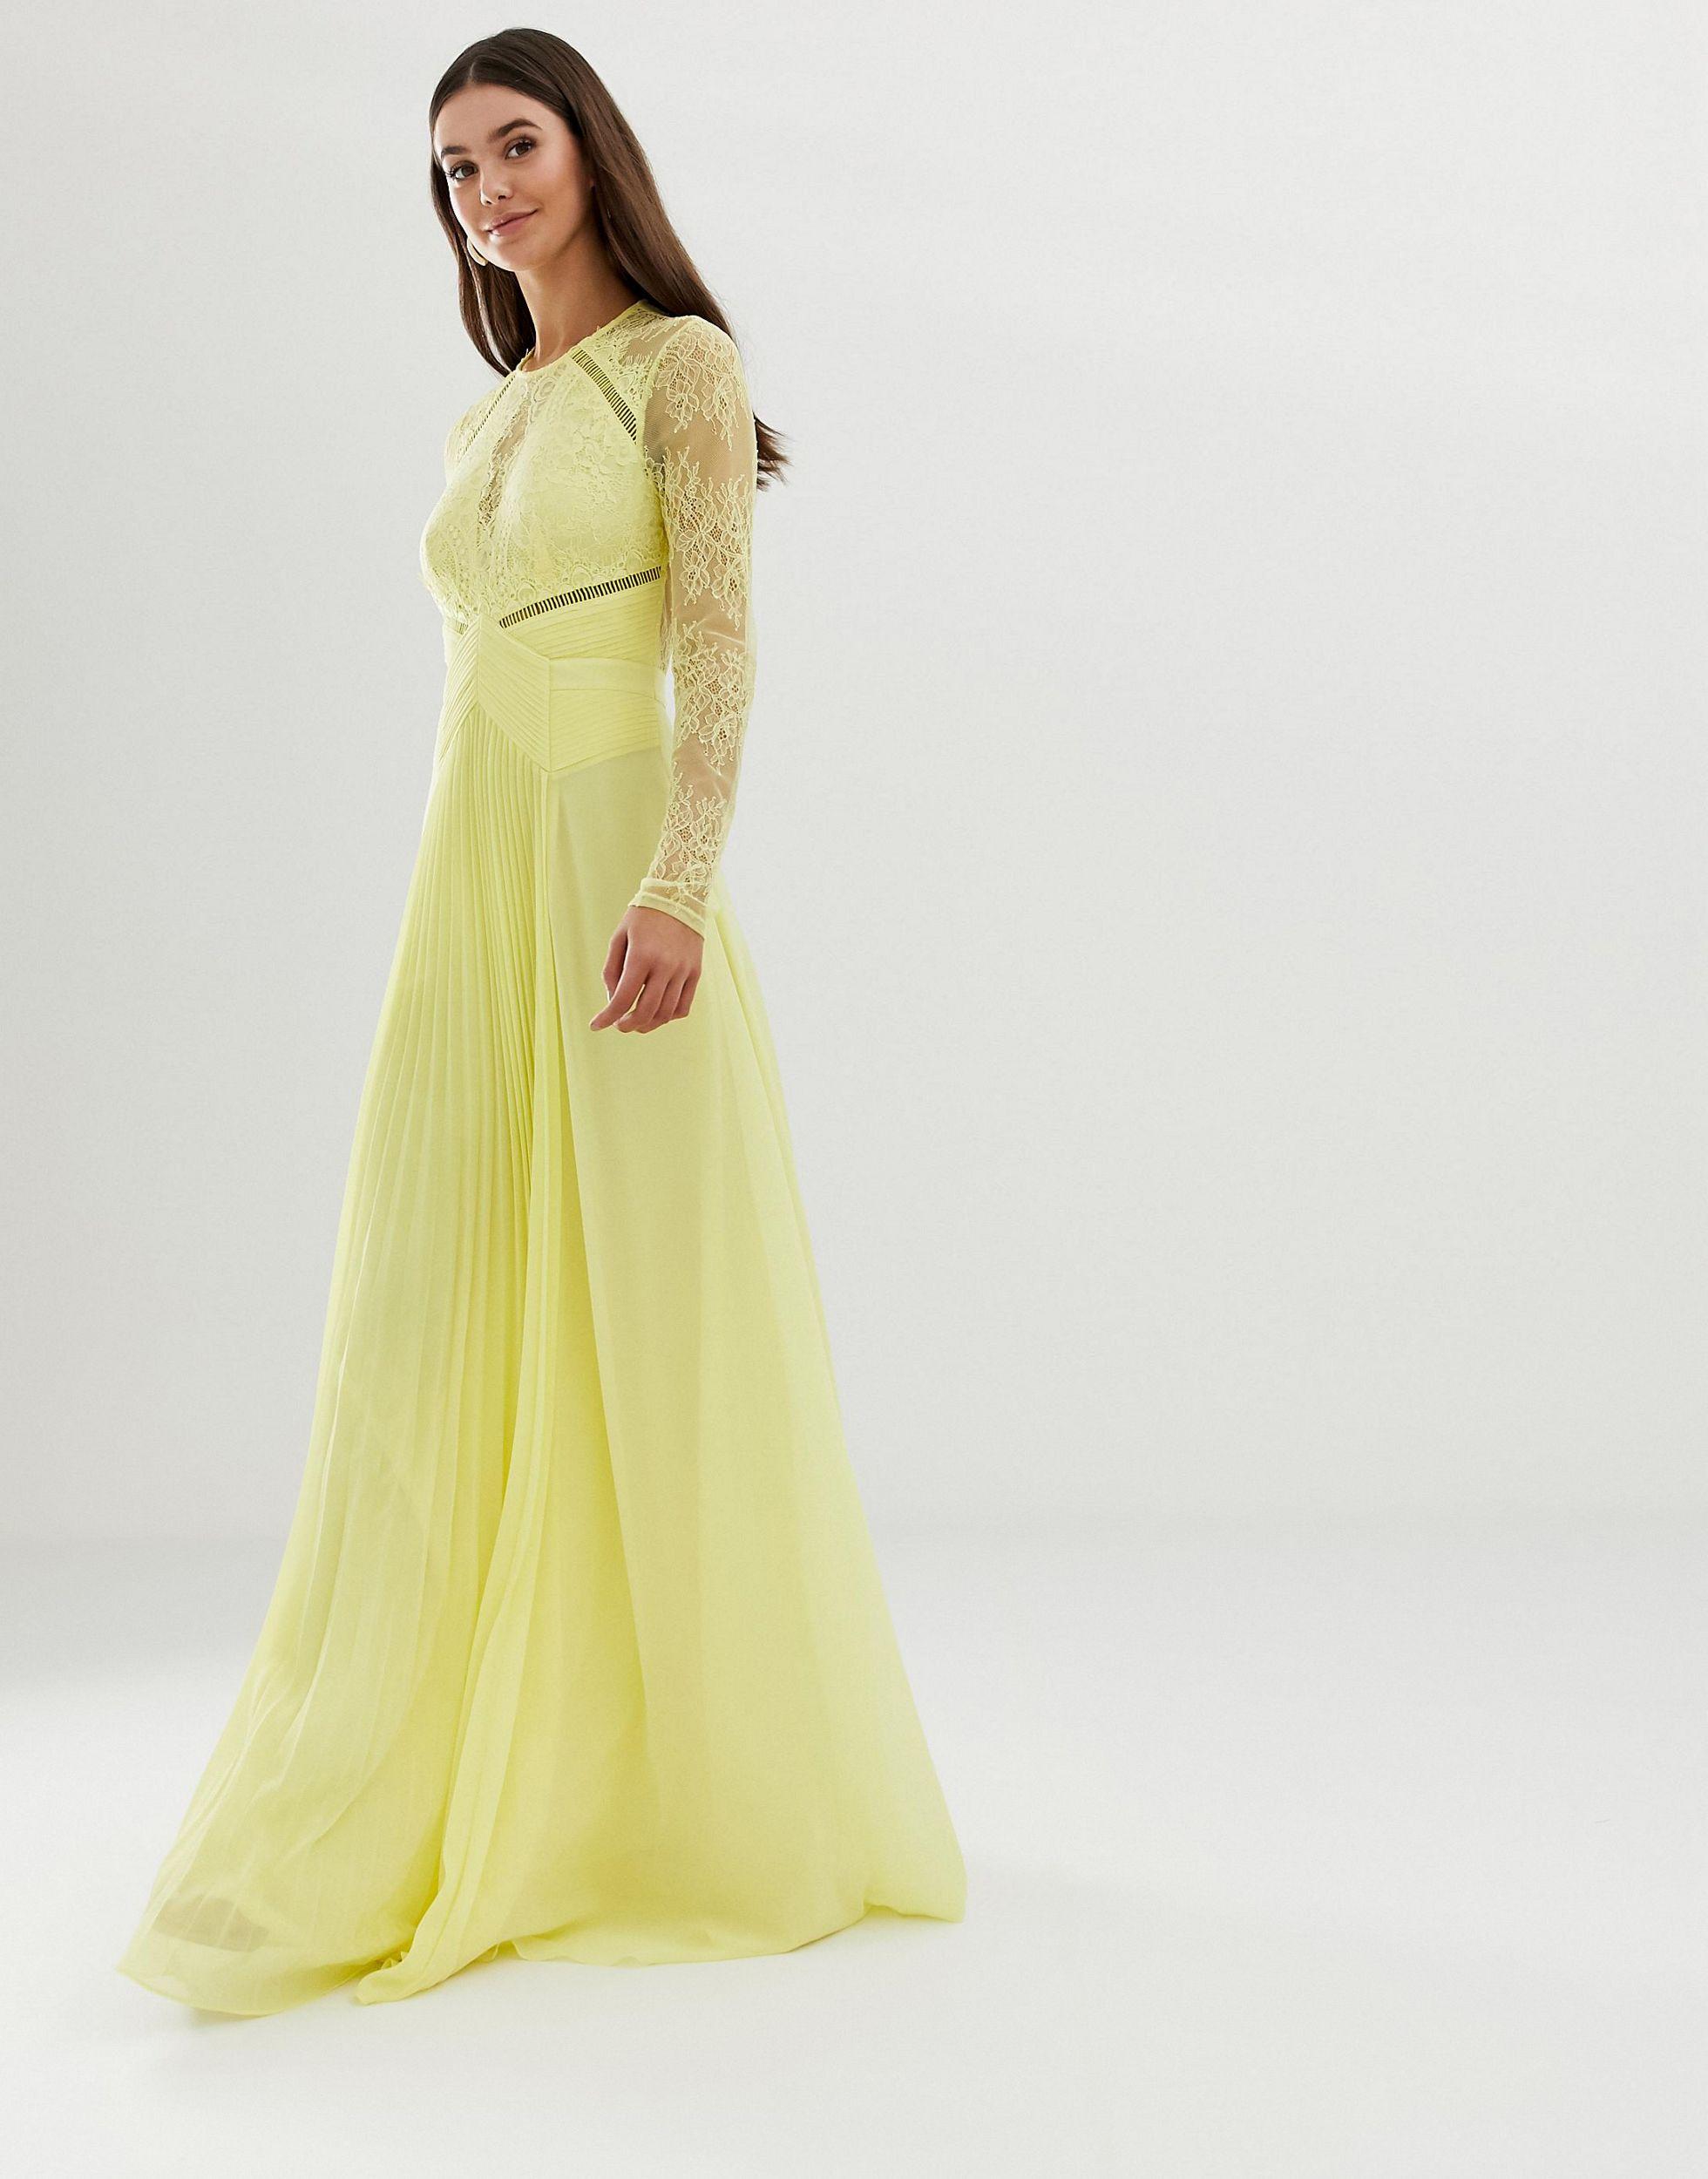 ASOS Asos Design Tall Long Sleeve Lace Panelled Pleat Maxi Dress in Yellow  | Lyst UK